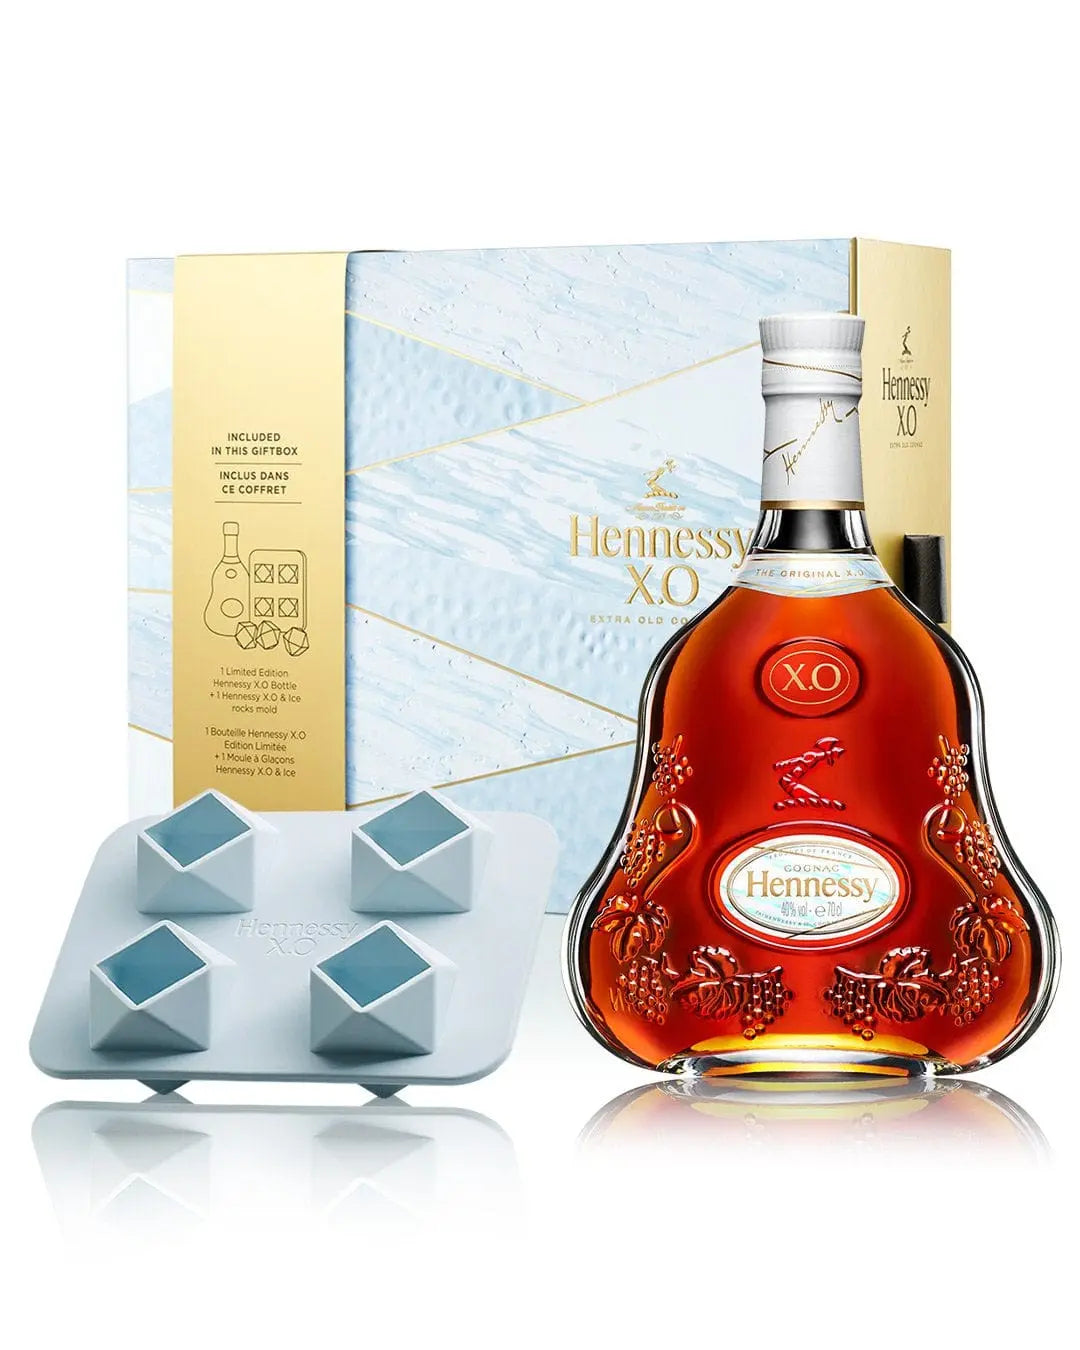 Hennessy X.O. Cognac and Ice Mould Gift Set, 70 cl Cognac & Brandy